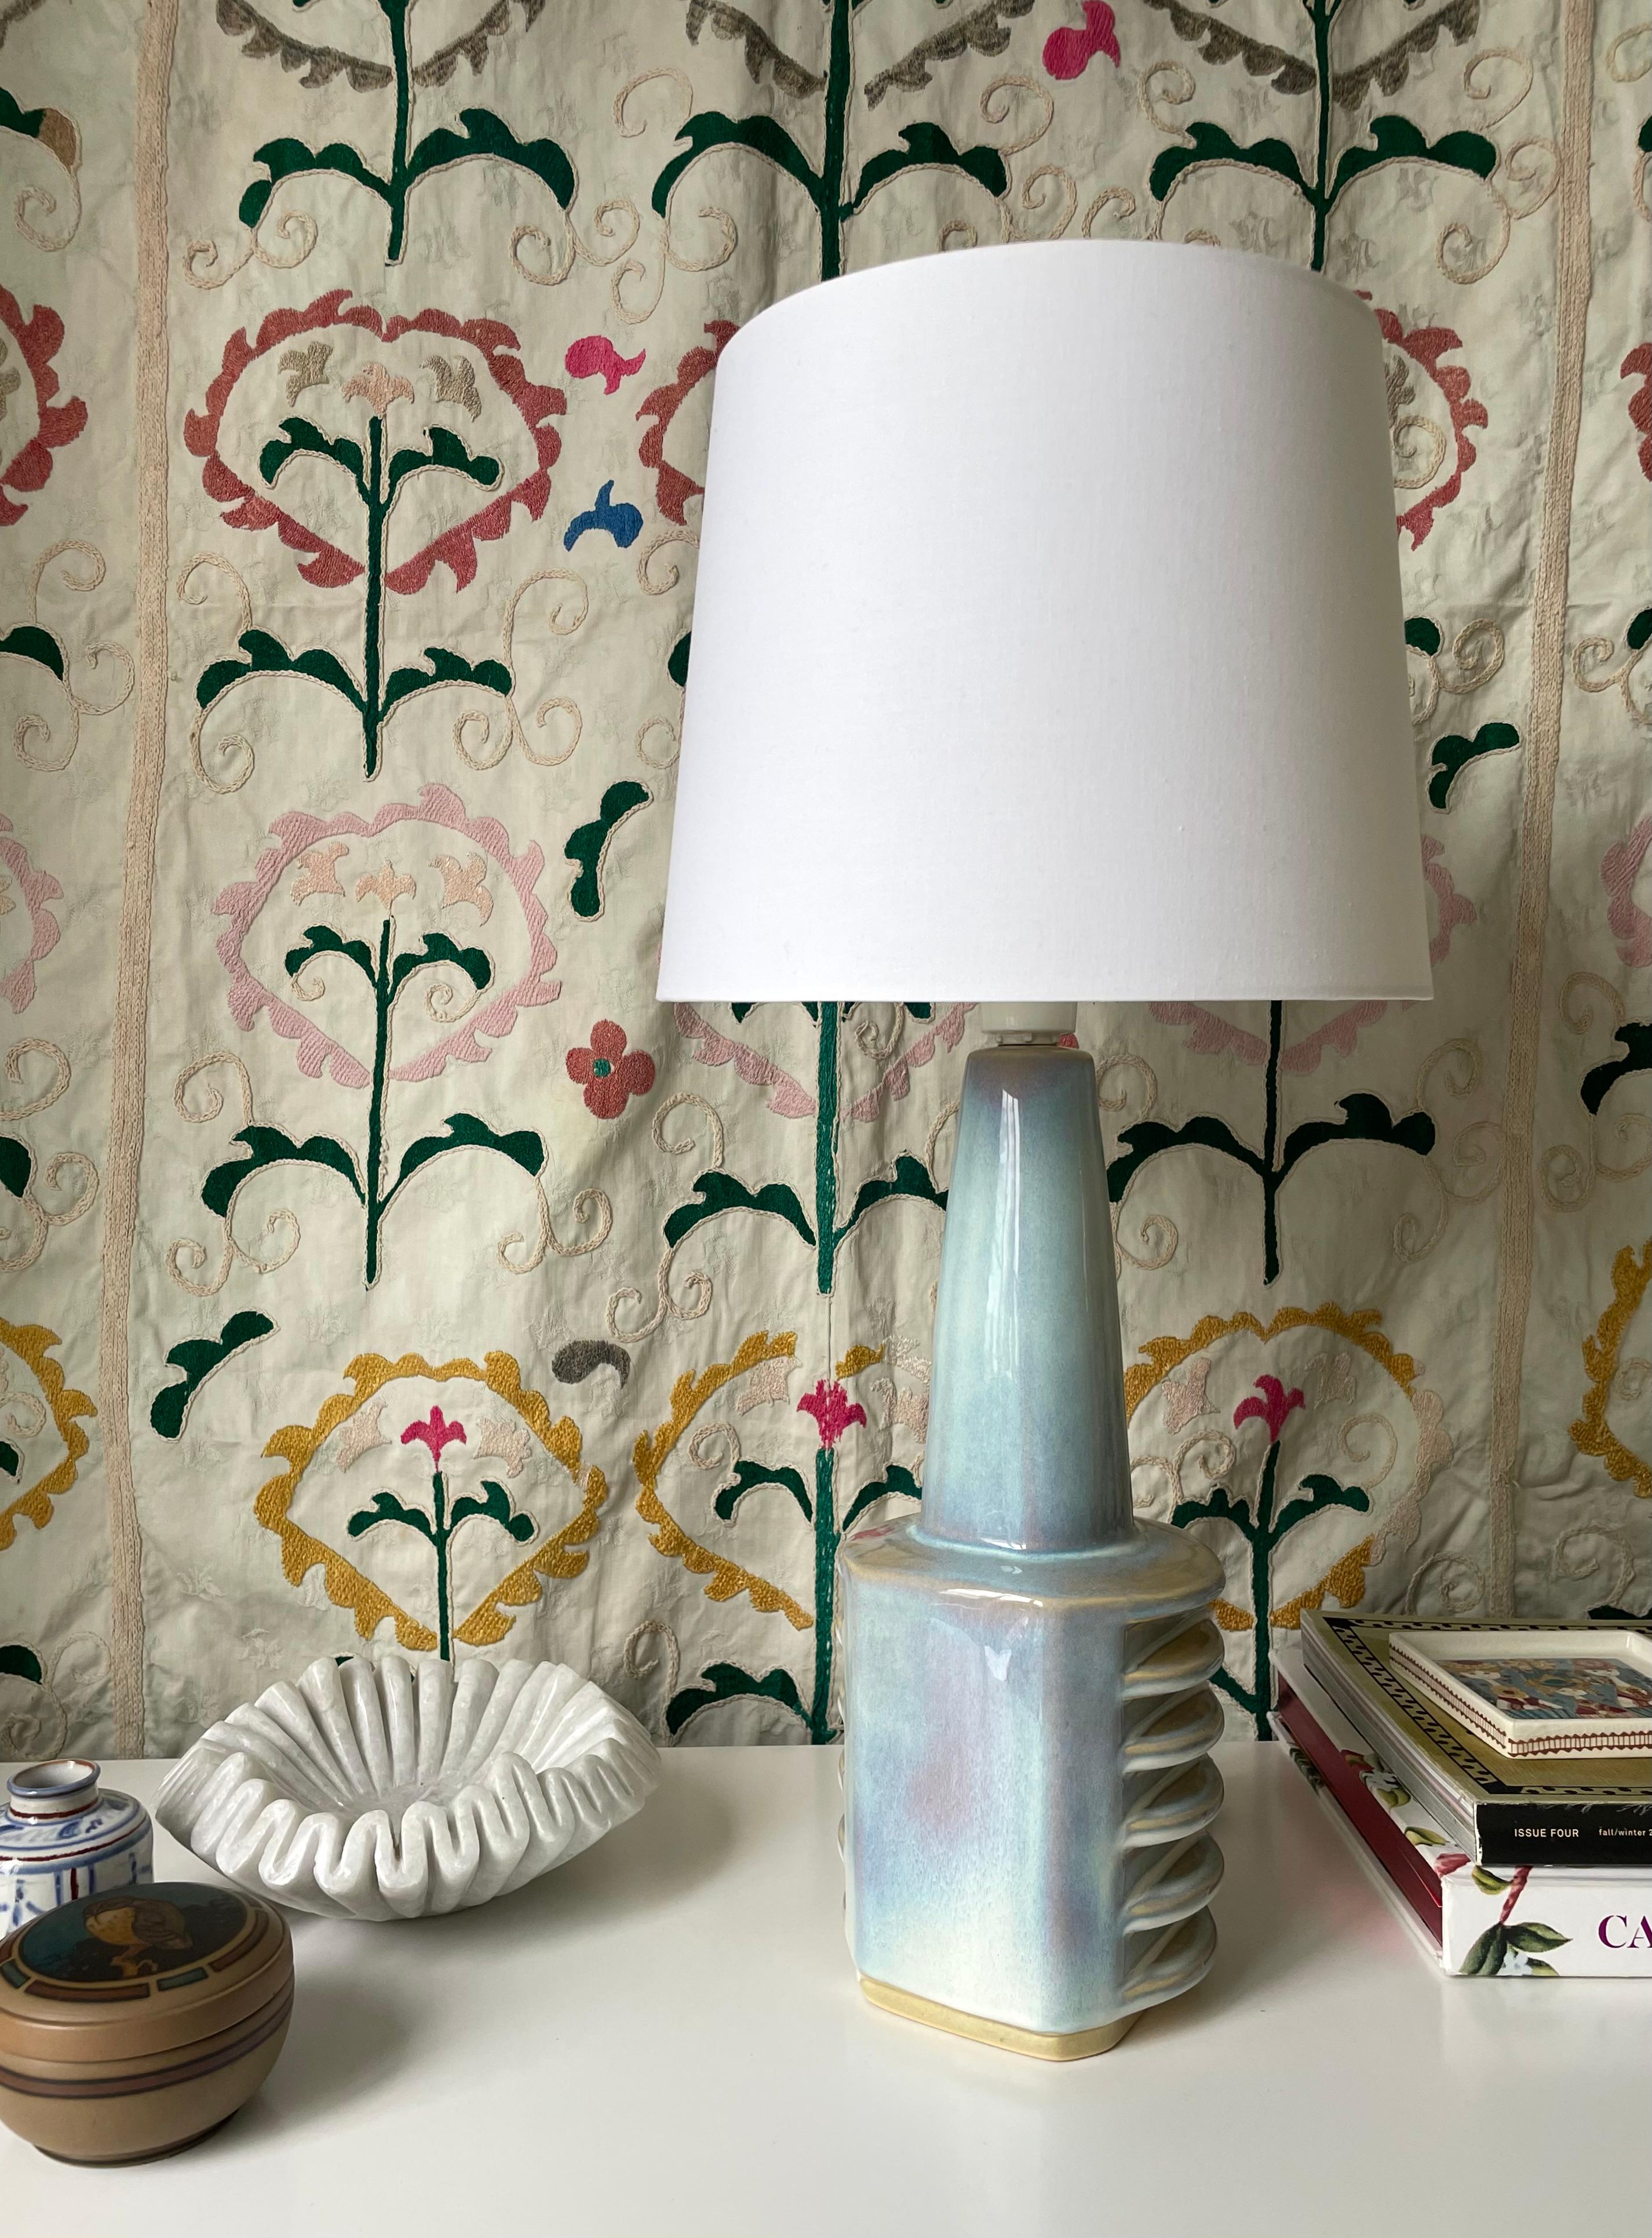 Danish Mid-Century Modern stoneware table lamp by Einar Johansen for Søholm. Light blue shiny glaze mixed with lilac, caramel brown and white. Tall neck on sculptural base with rounded protruding discs on each side of the lamp. Rewired with original